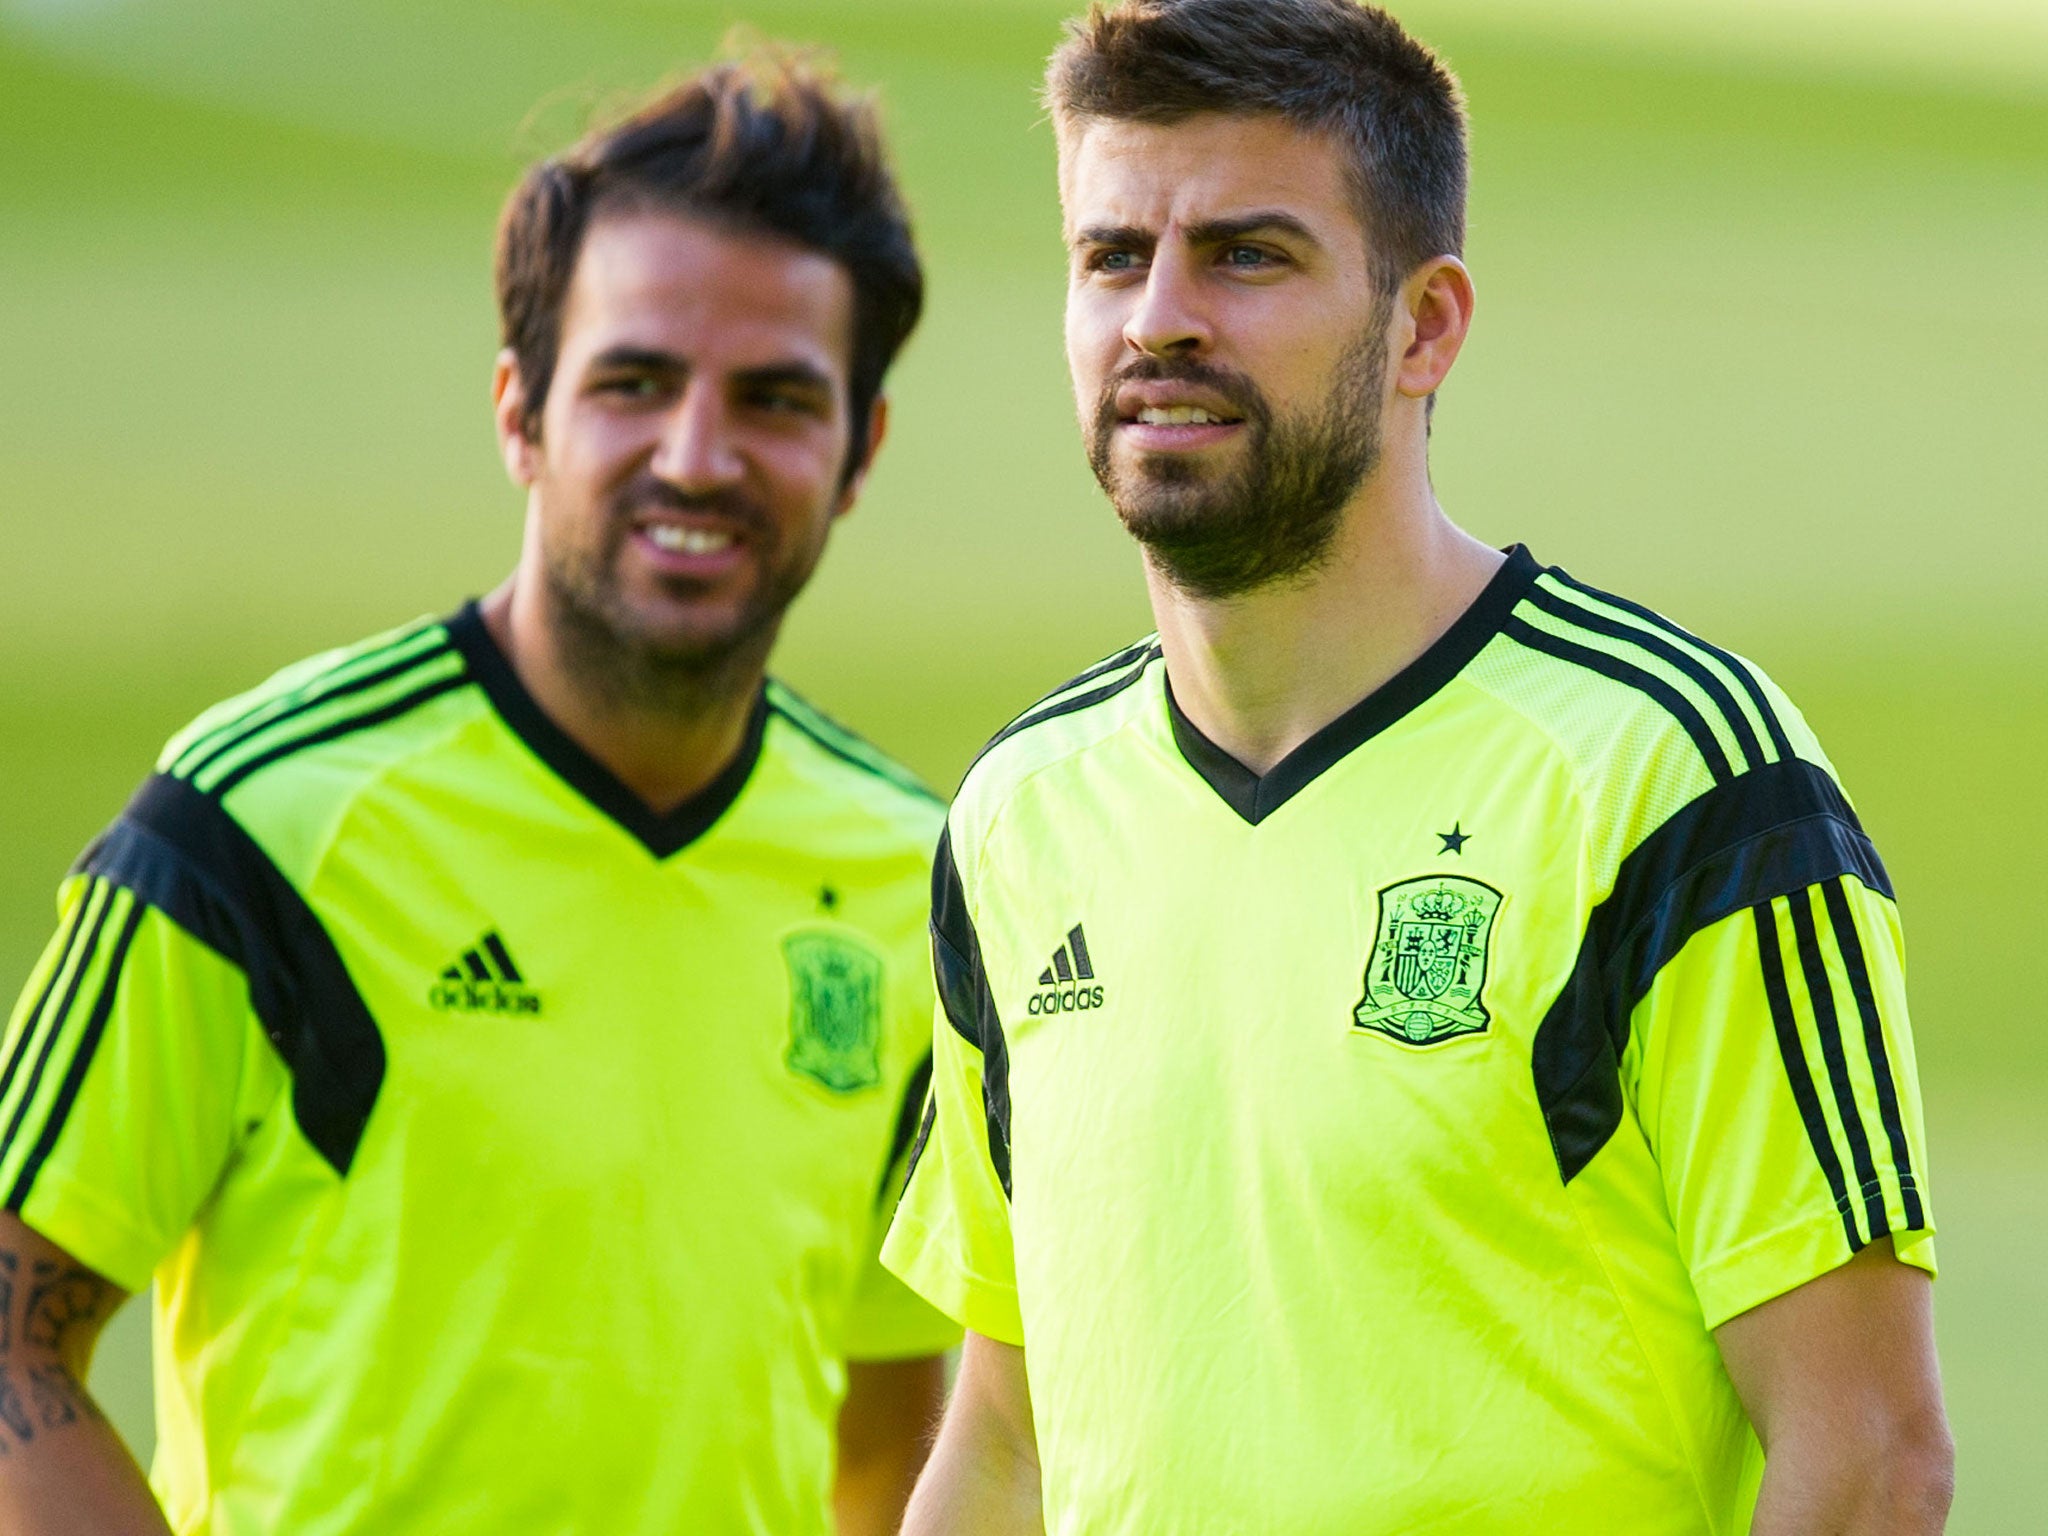 Cesc Fabregas (left) and Gerard Pique during training as Spain prepare for the World Cup